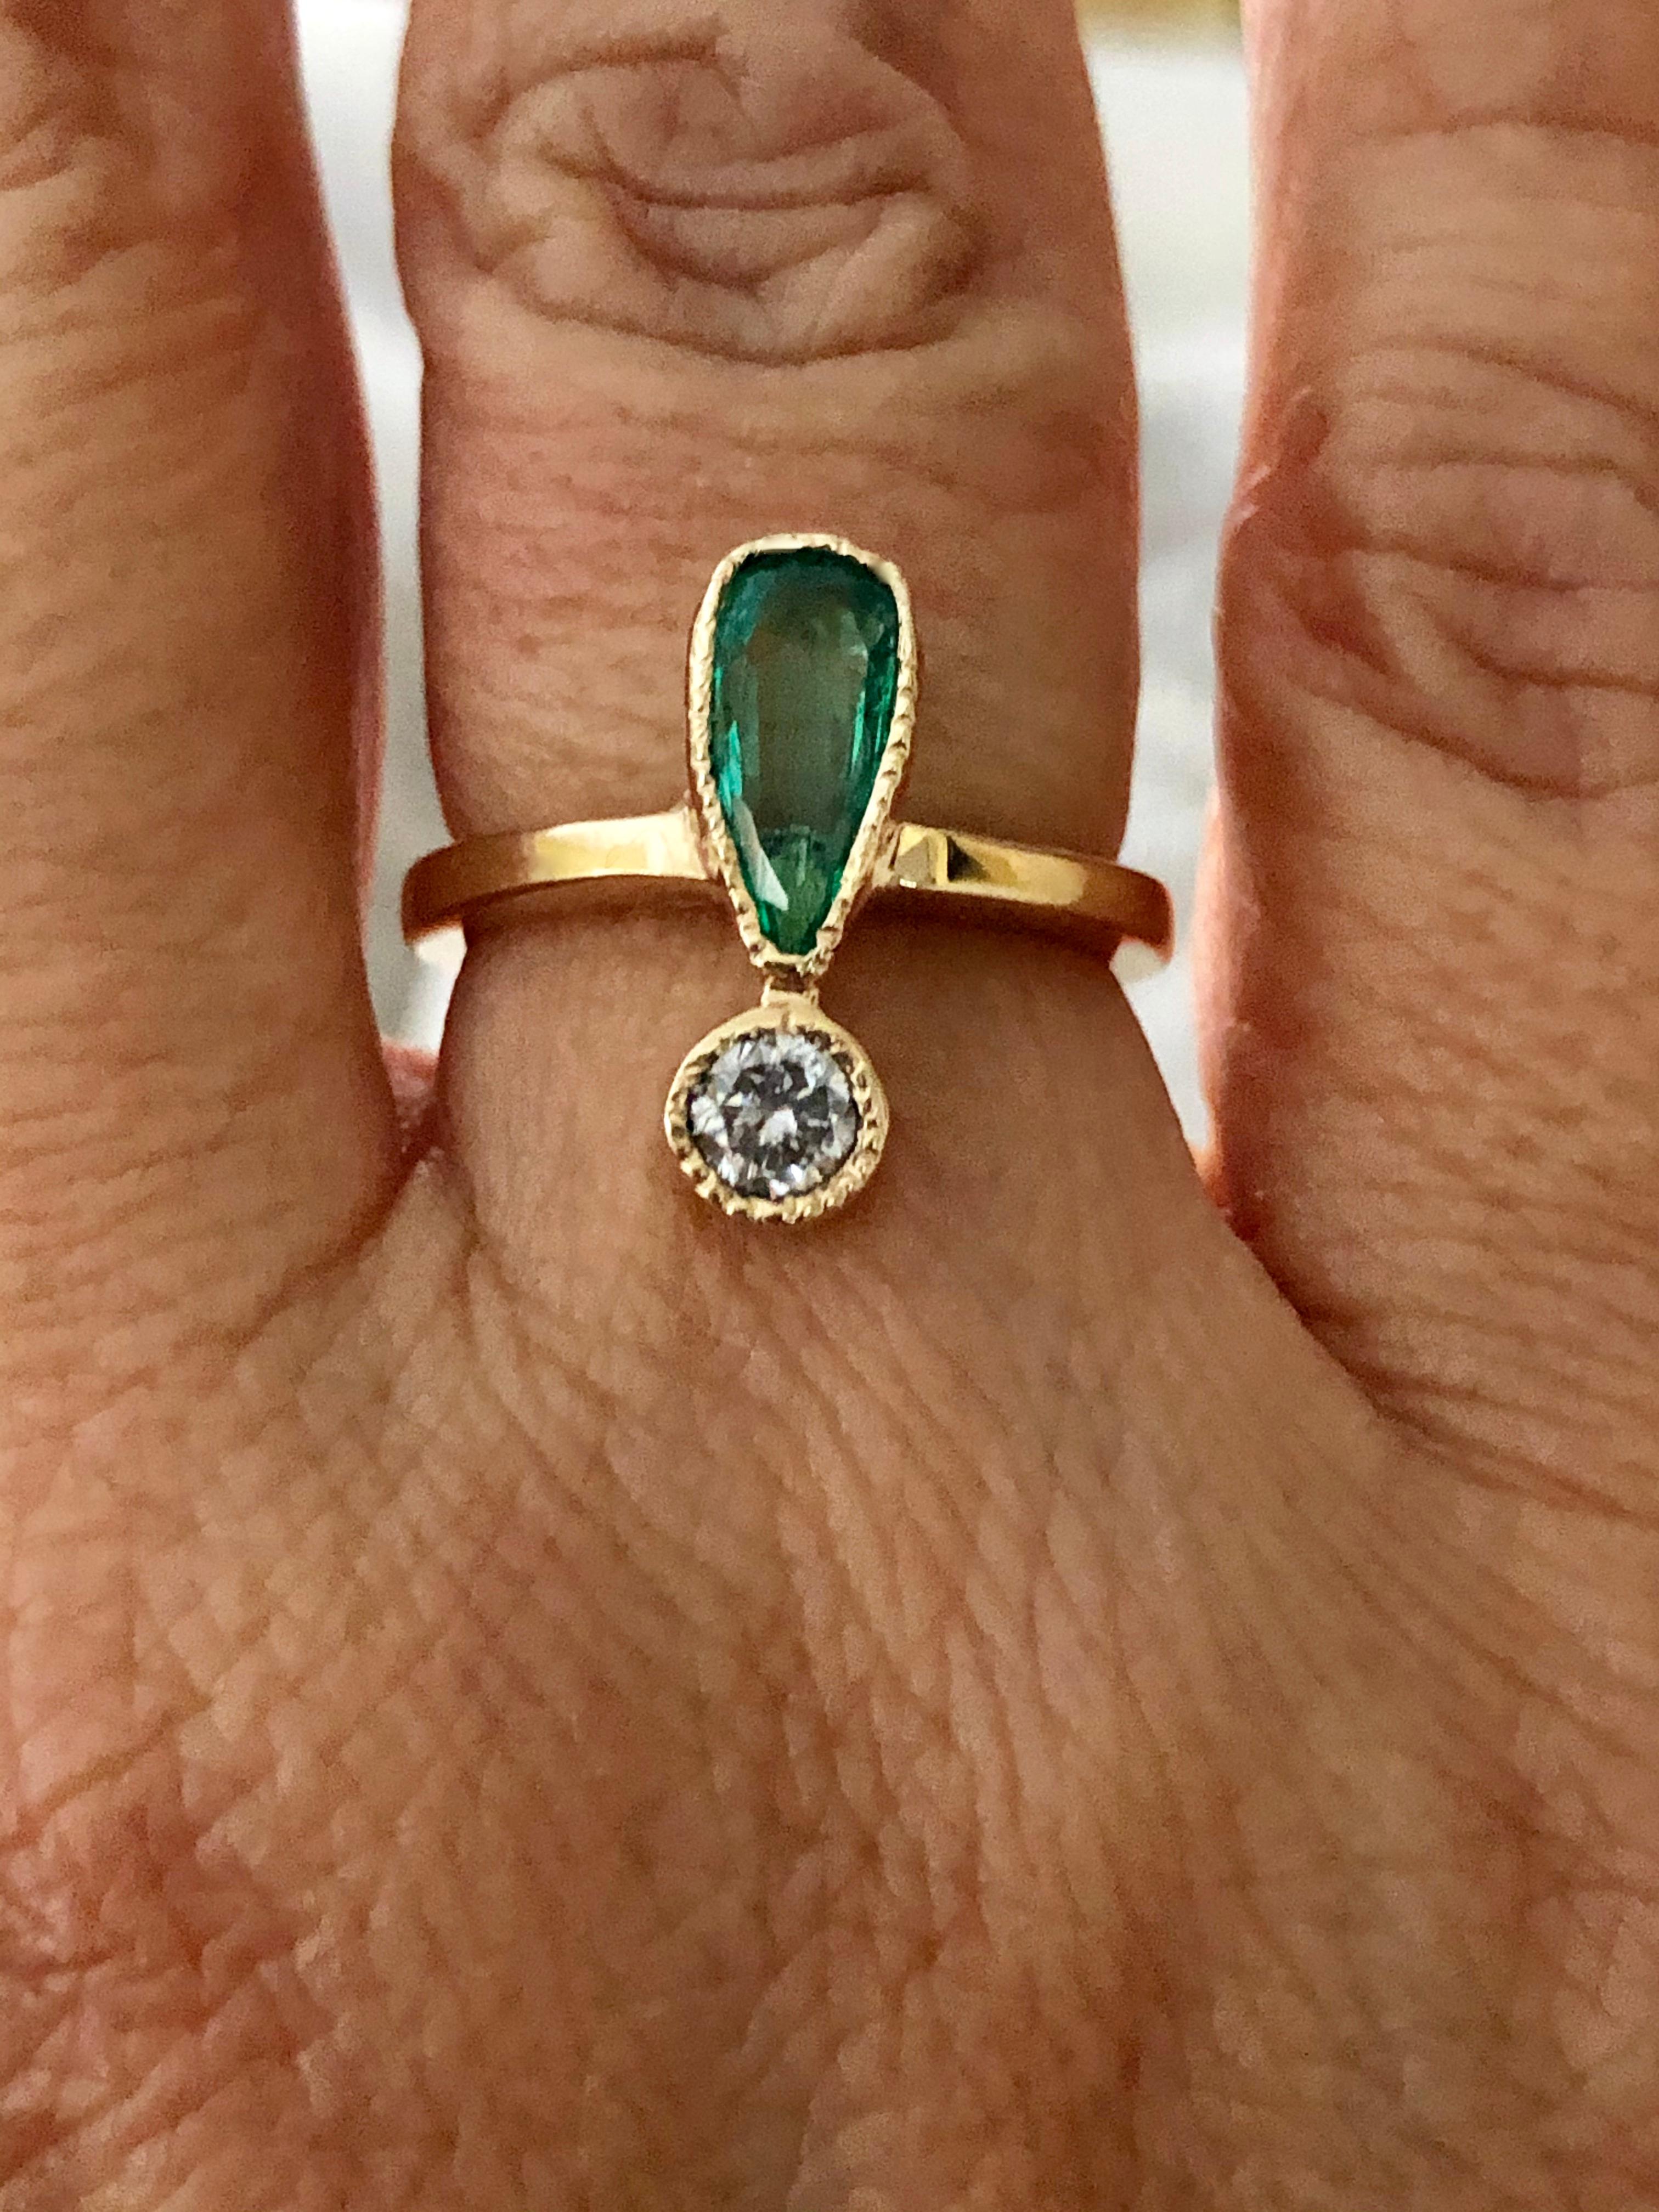 An Antique Style Emerald and Diamond Gold Ring Inspire in the early 1900's The 18K yellow gold ring is bezel-set with a pear-shaped 0.85 carat natural Colombian emerald medium green color, excellent clarity, and a round cut diamond, approximately